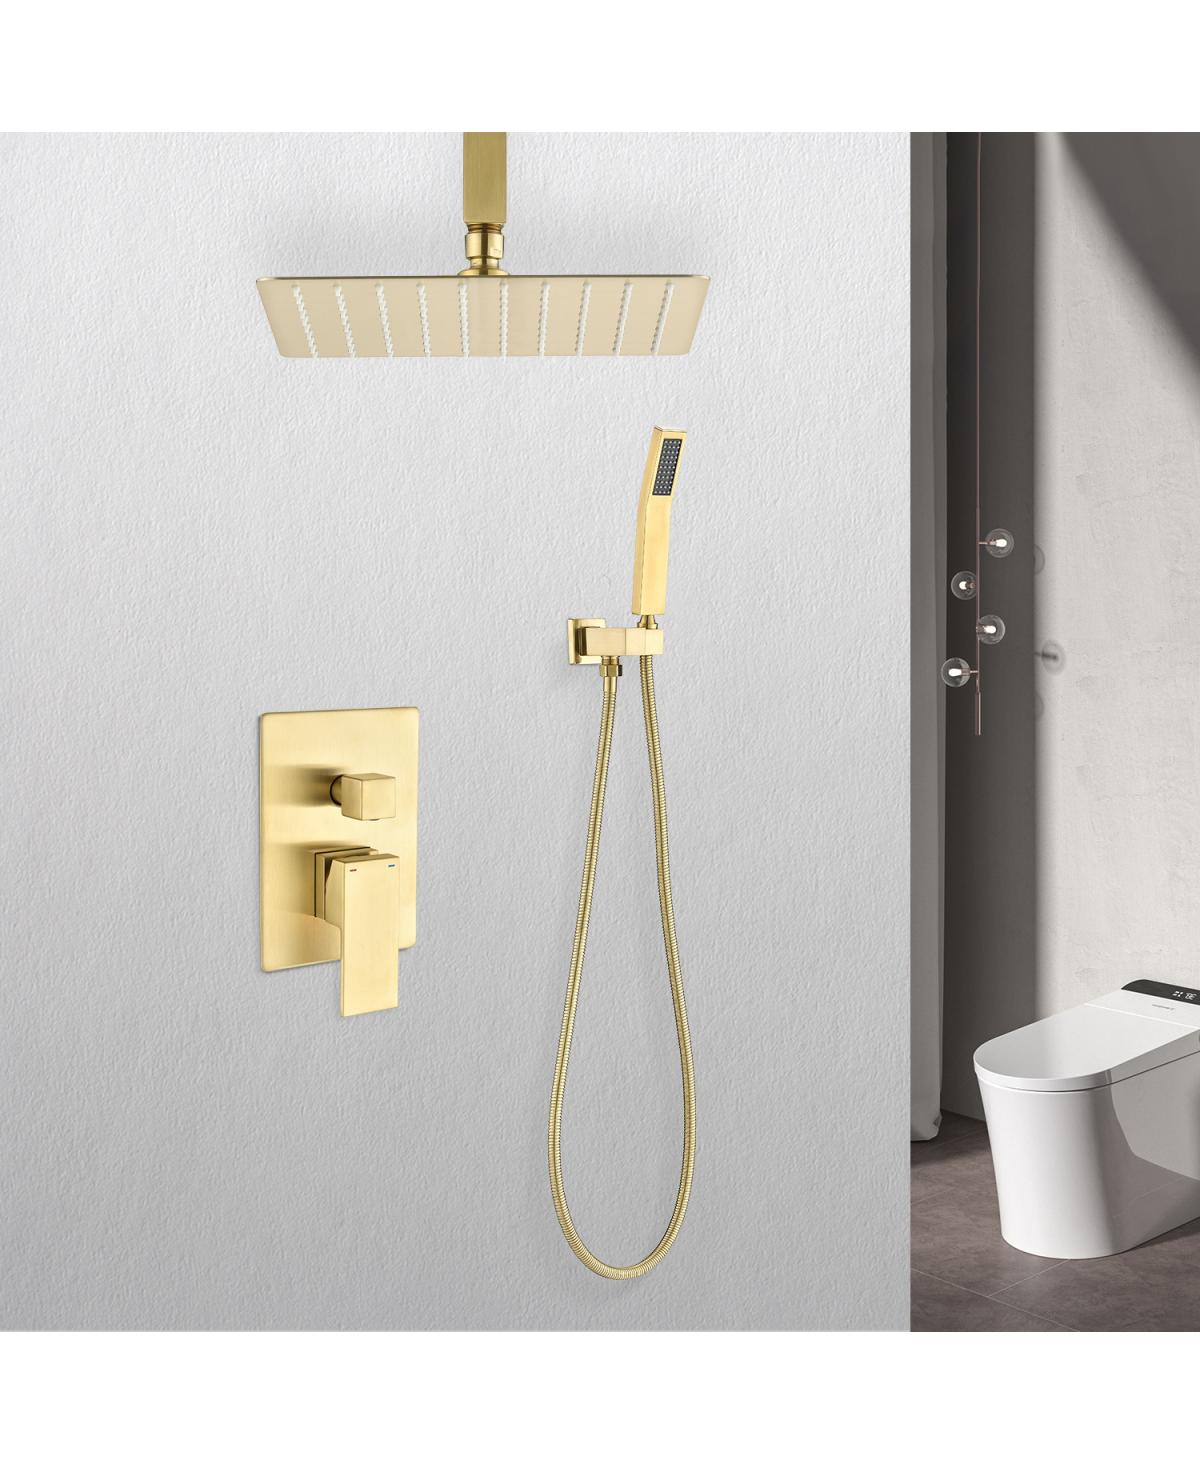 Ceiling Mounted Shower System Combo Set With Handheld And 16" Shower Head - Gold